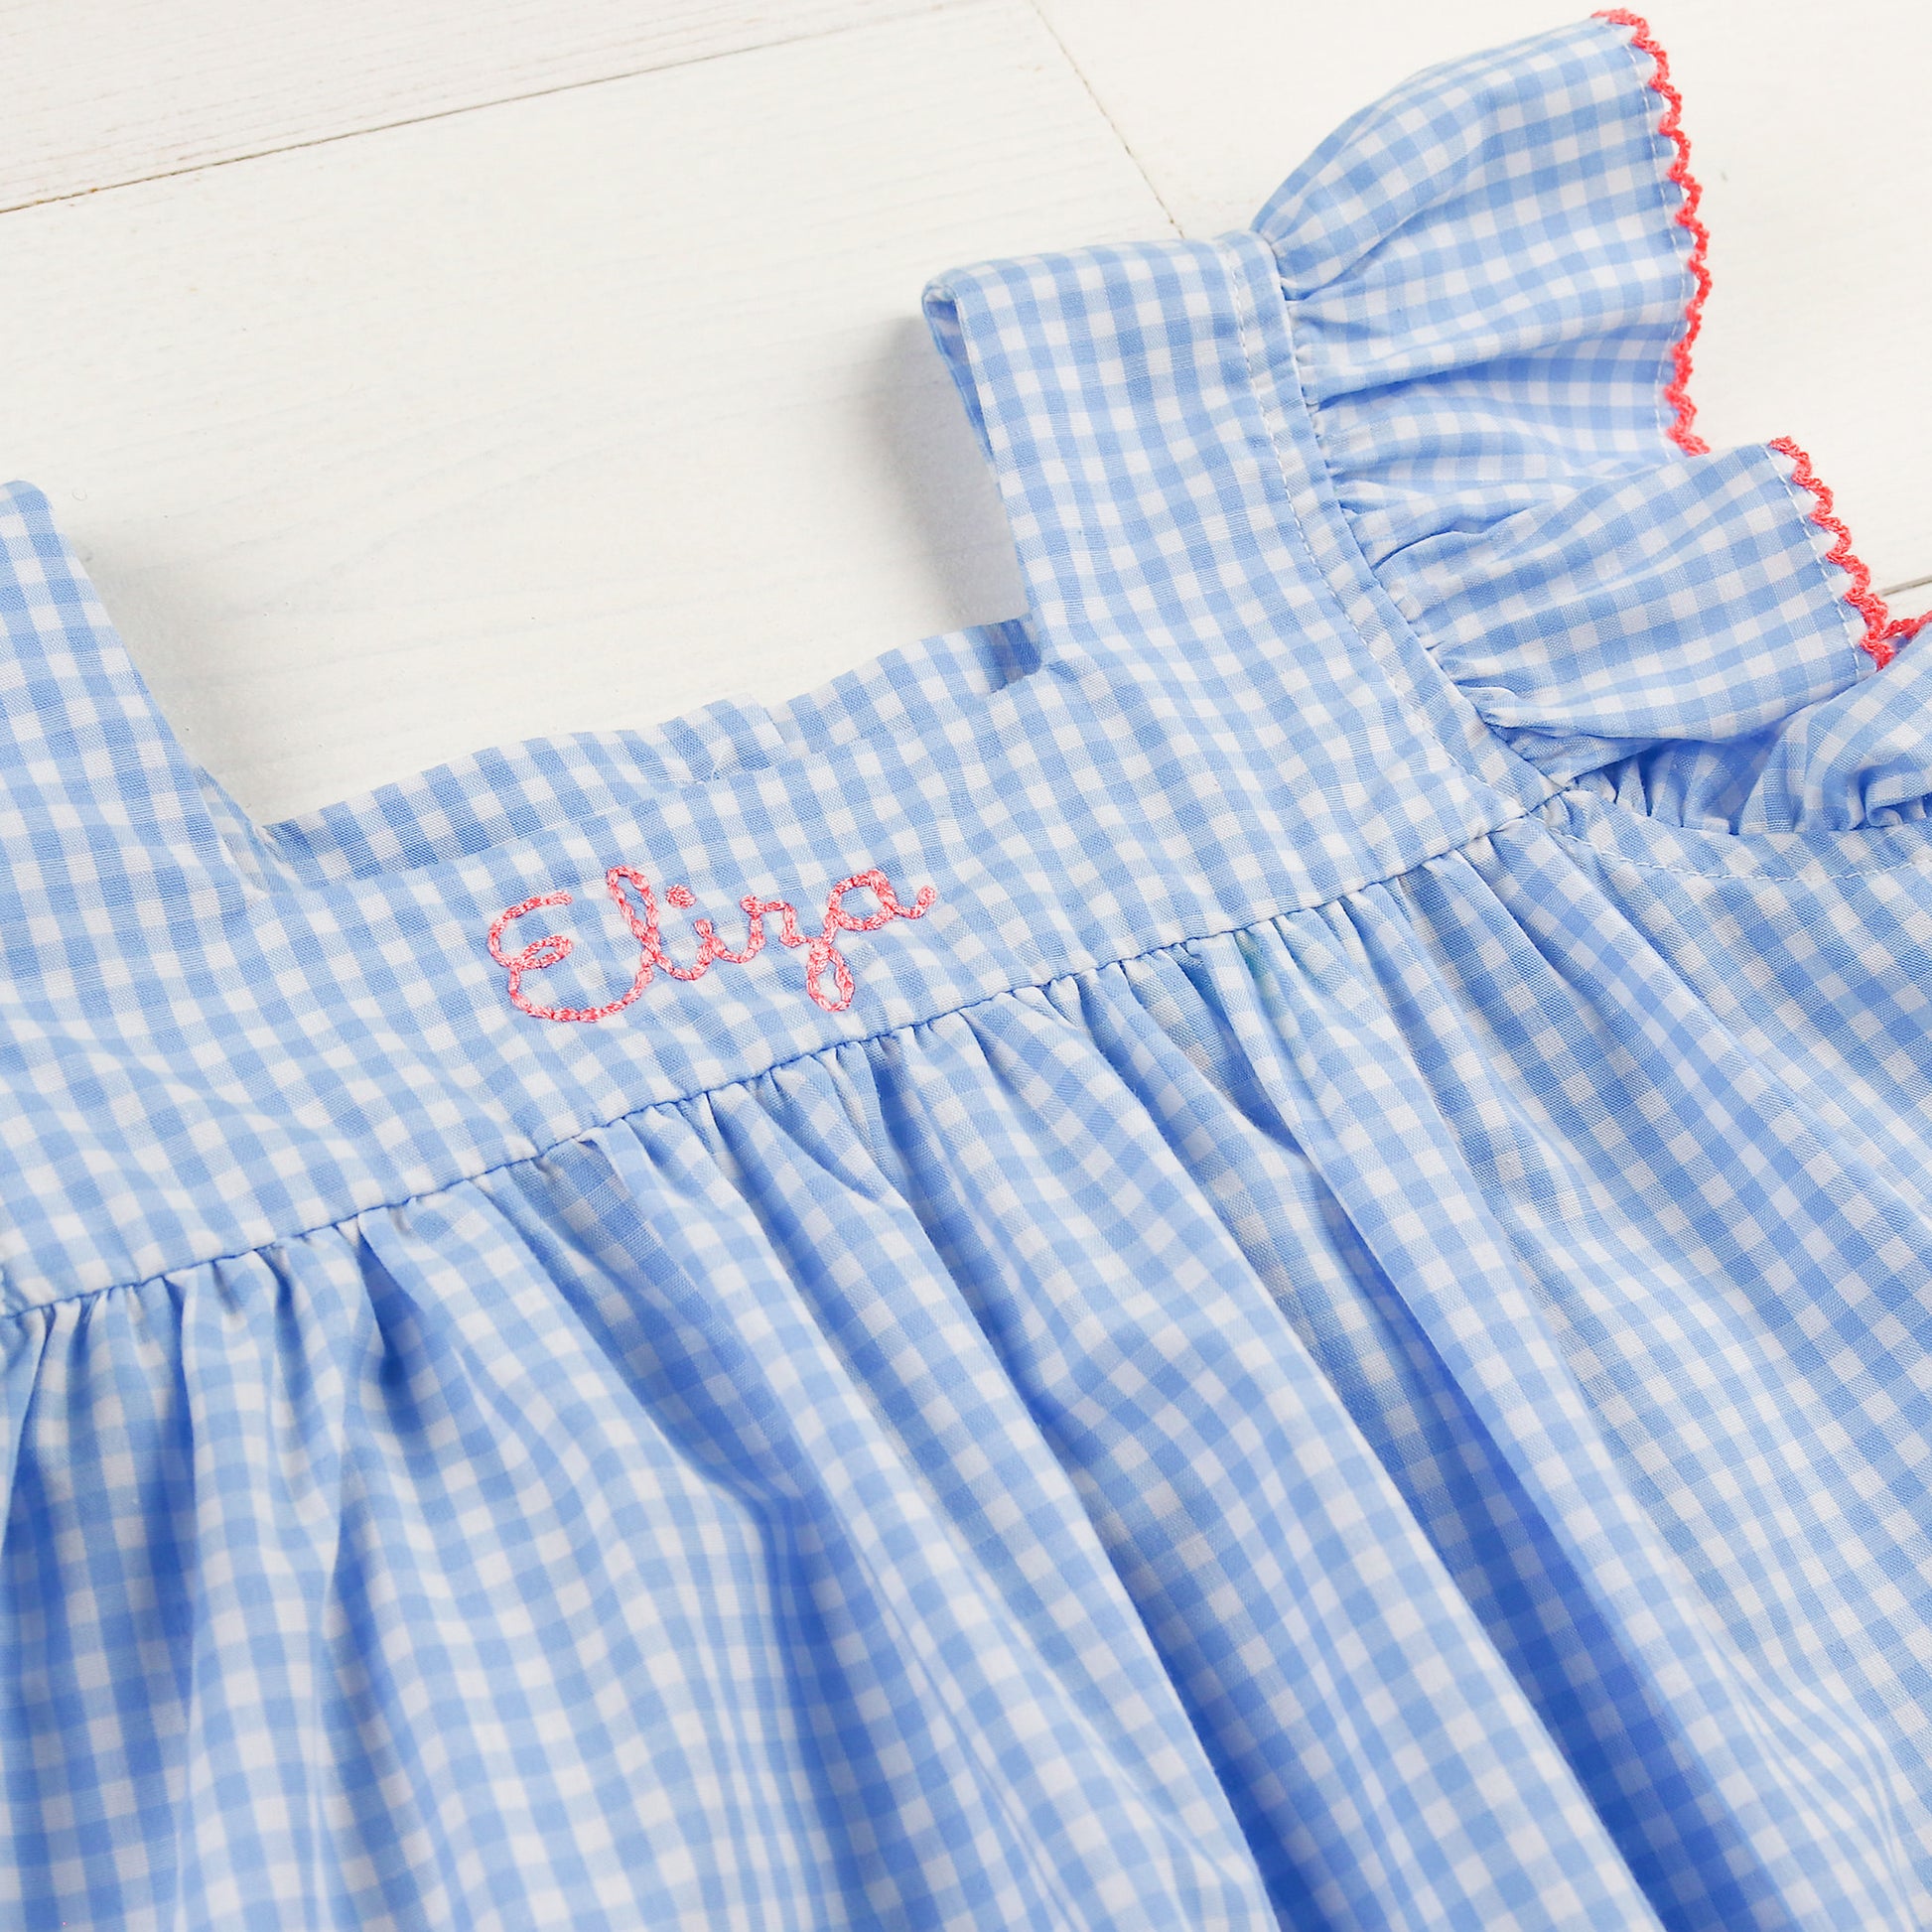 close up of a monogram on a blue and white gingham dress